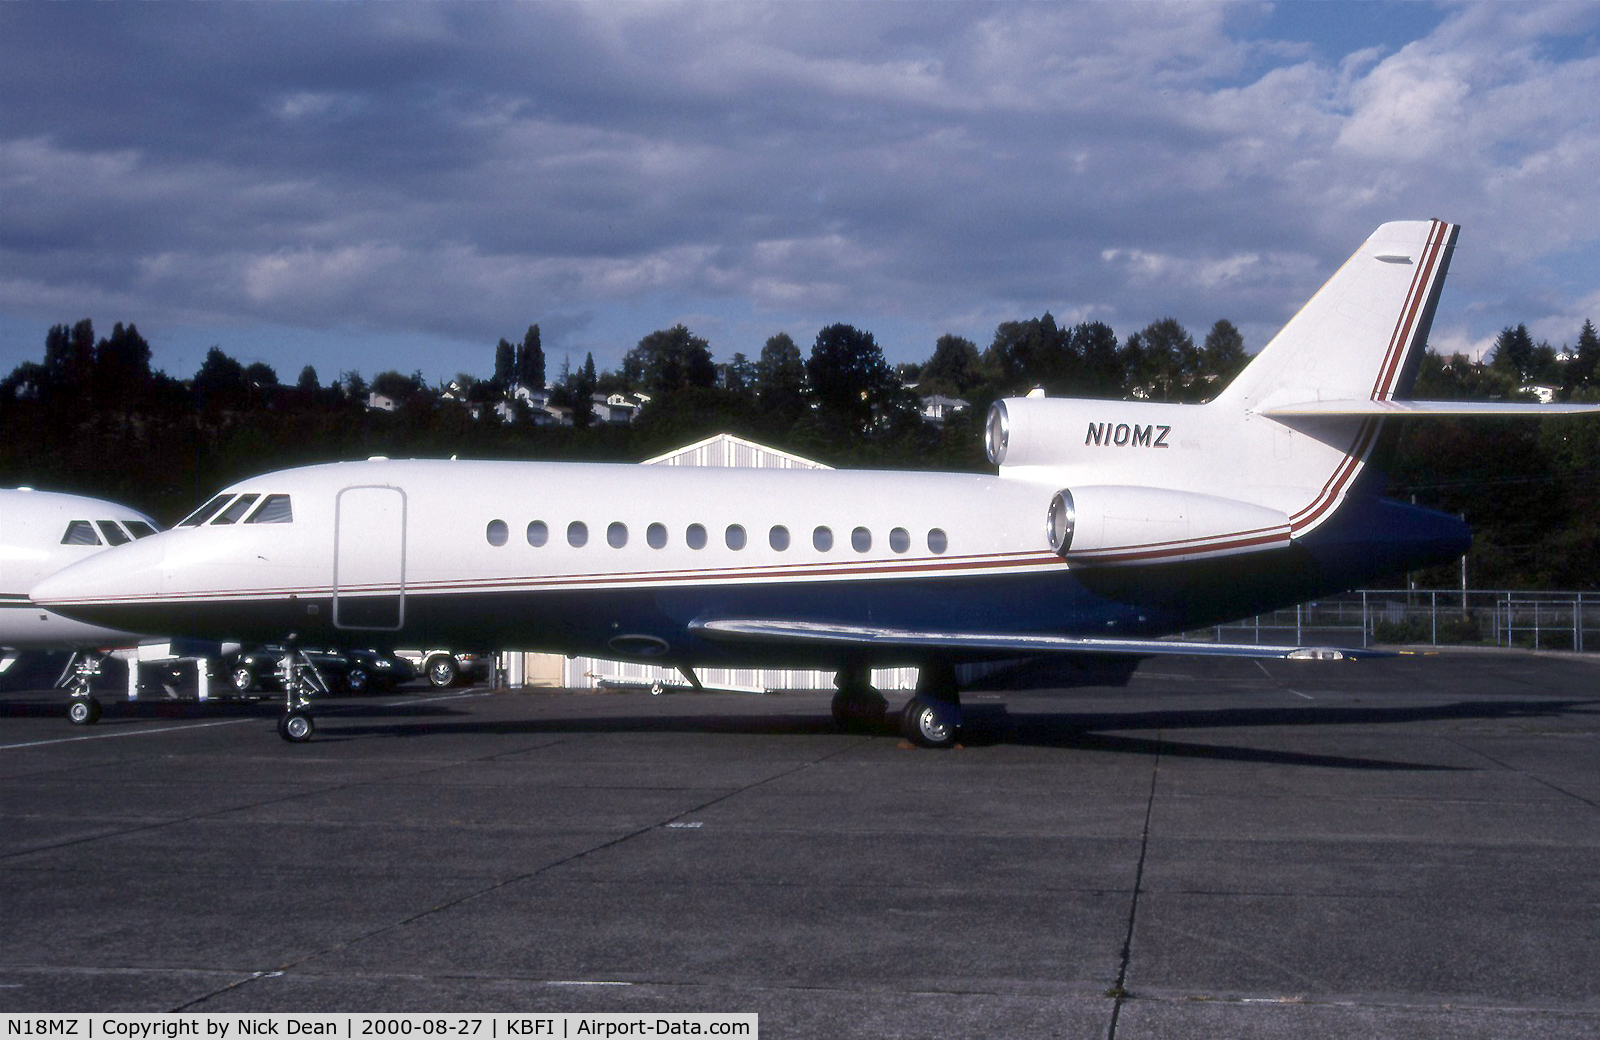 N18MZ, 1987 Dassault Falcon 900 C/N 32, Seen here as N10MZ this airframe is currently registered N18MZ as posted